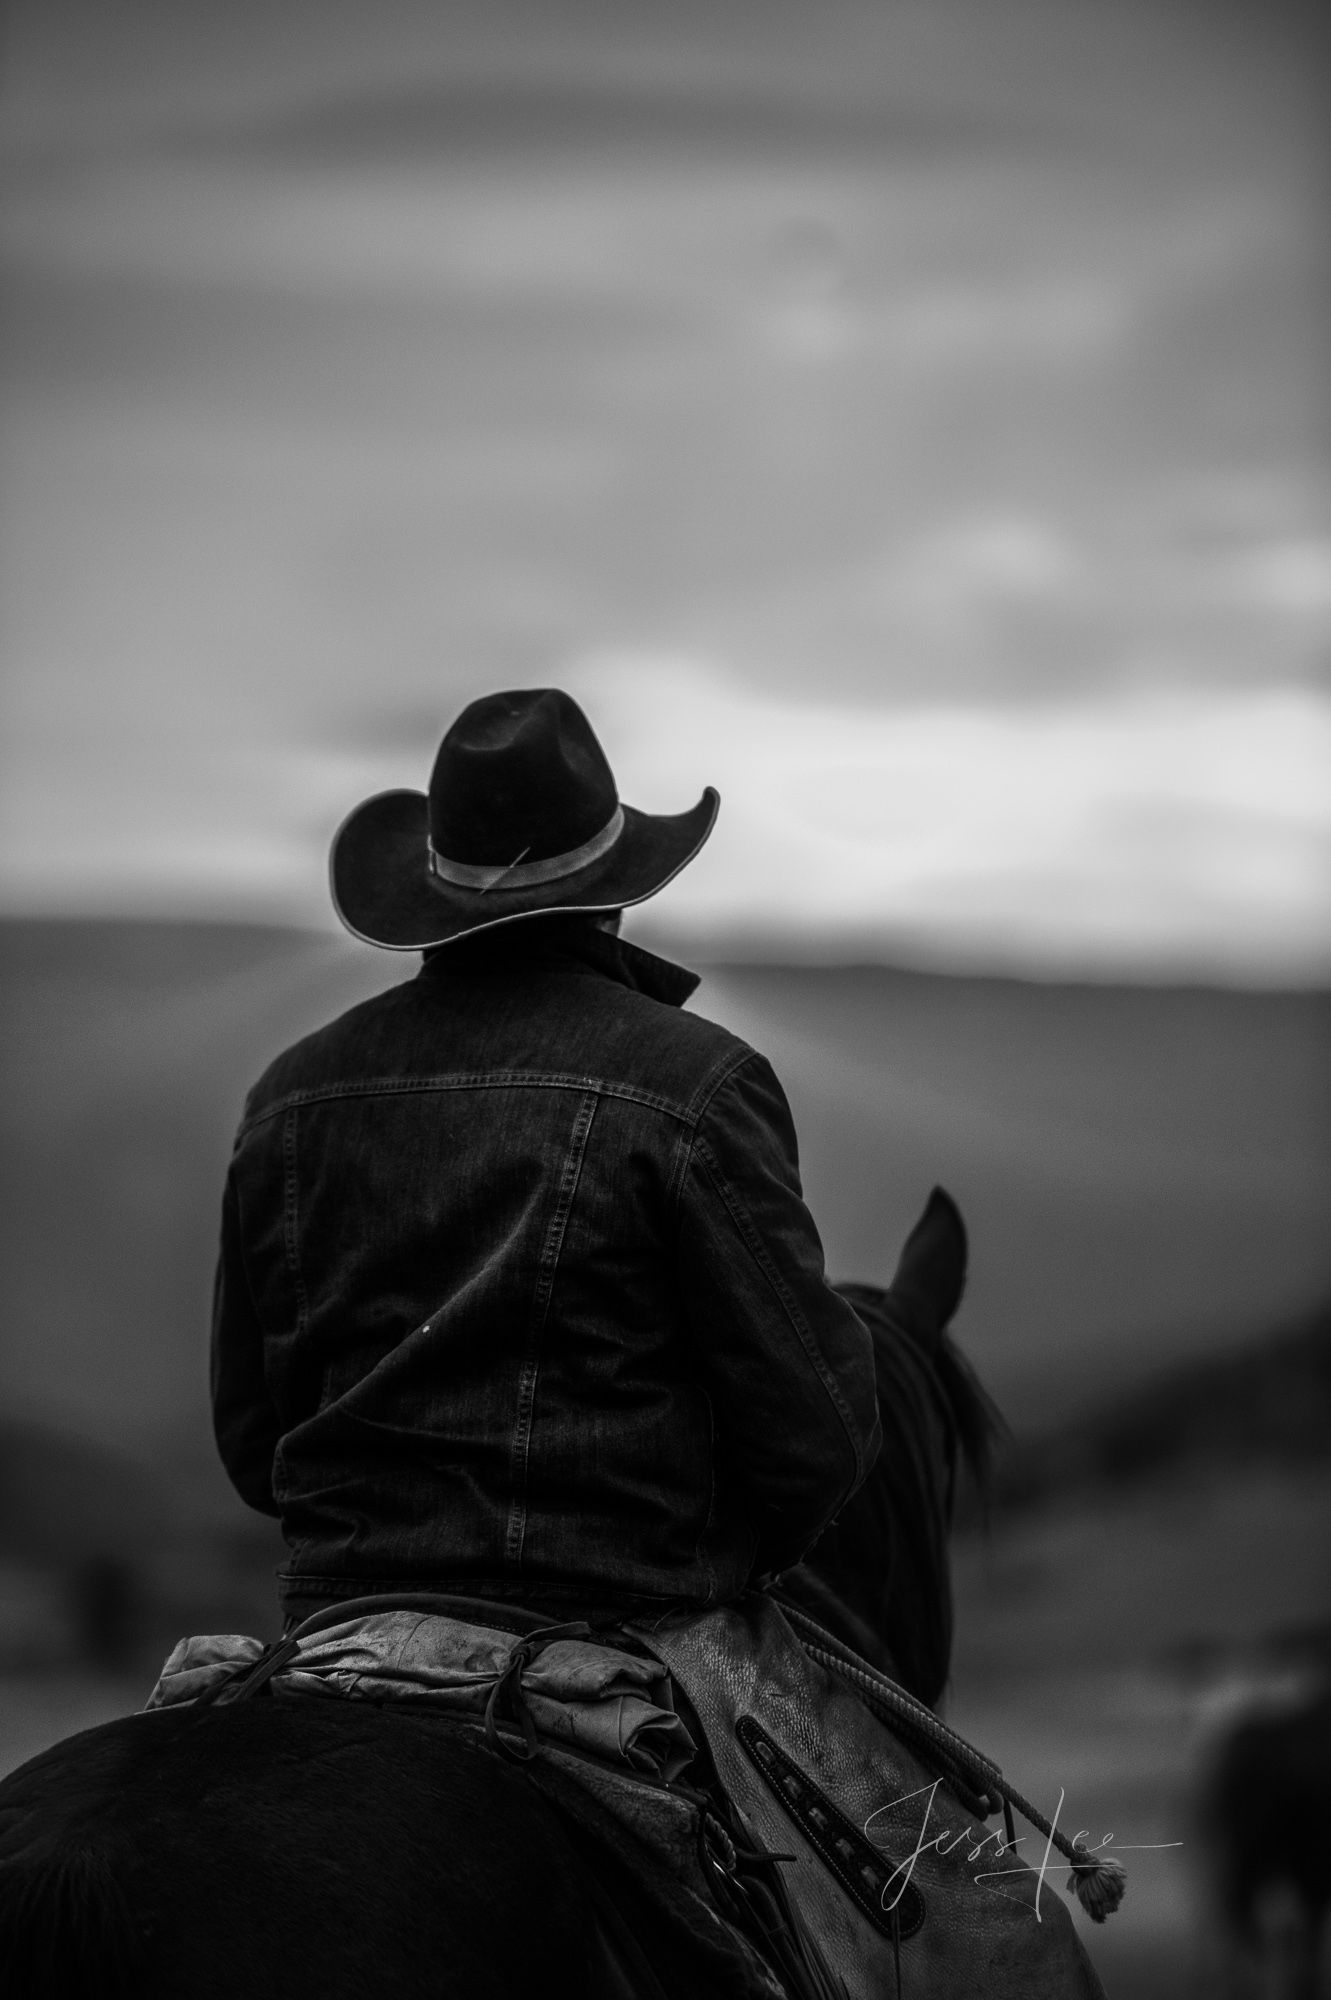 Fine Art Limited Edition Photo Prints of Cowboys, Horses, and life in the West. Sunrise Coming. A Cowboy picture in black and...